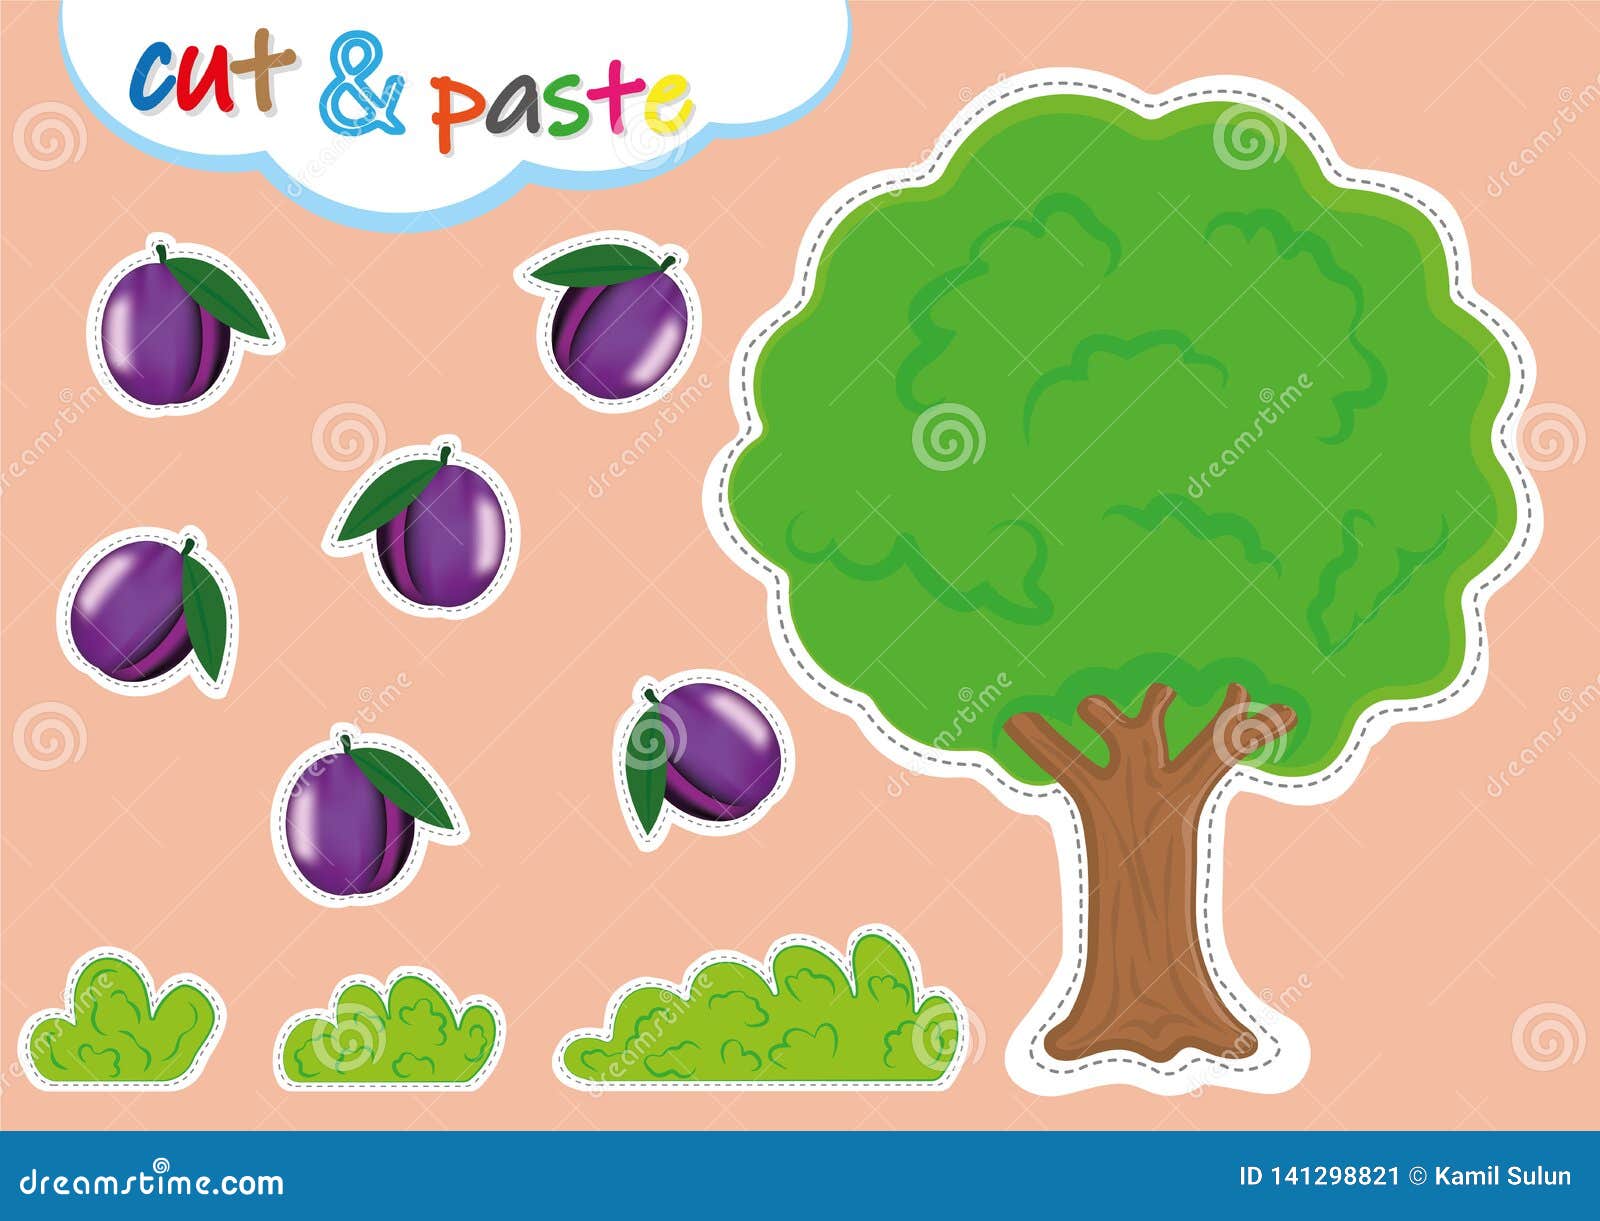 cut-and-paste-activities-for-kindergarten-preschool-cutting-and-pasting-worksheets-royalty-free